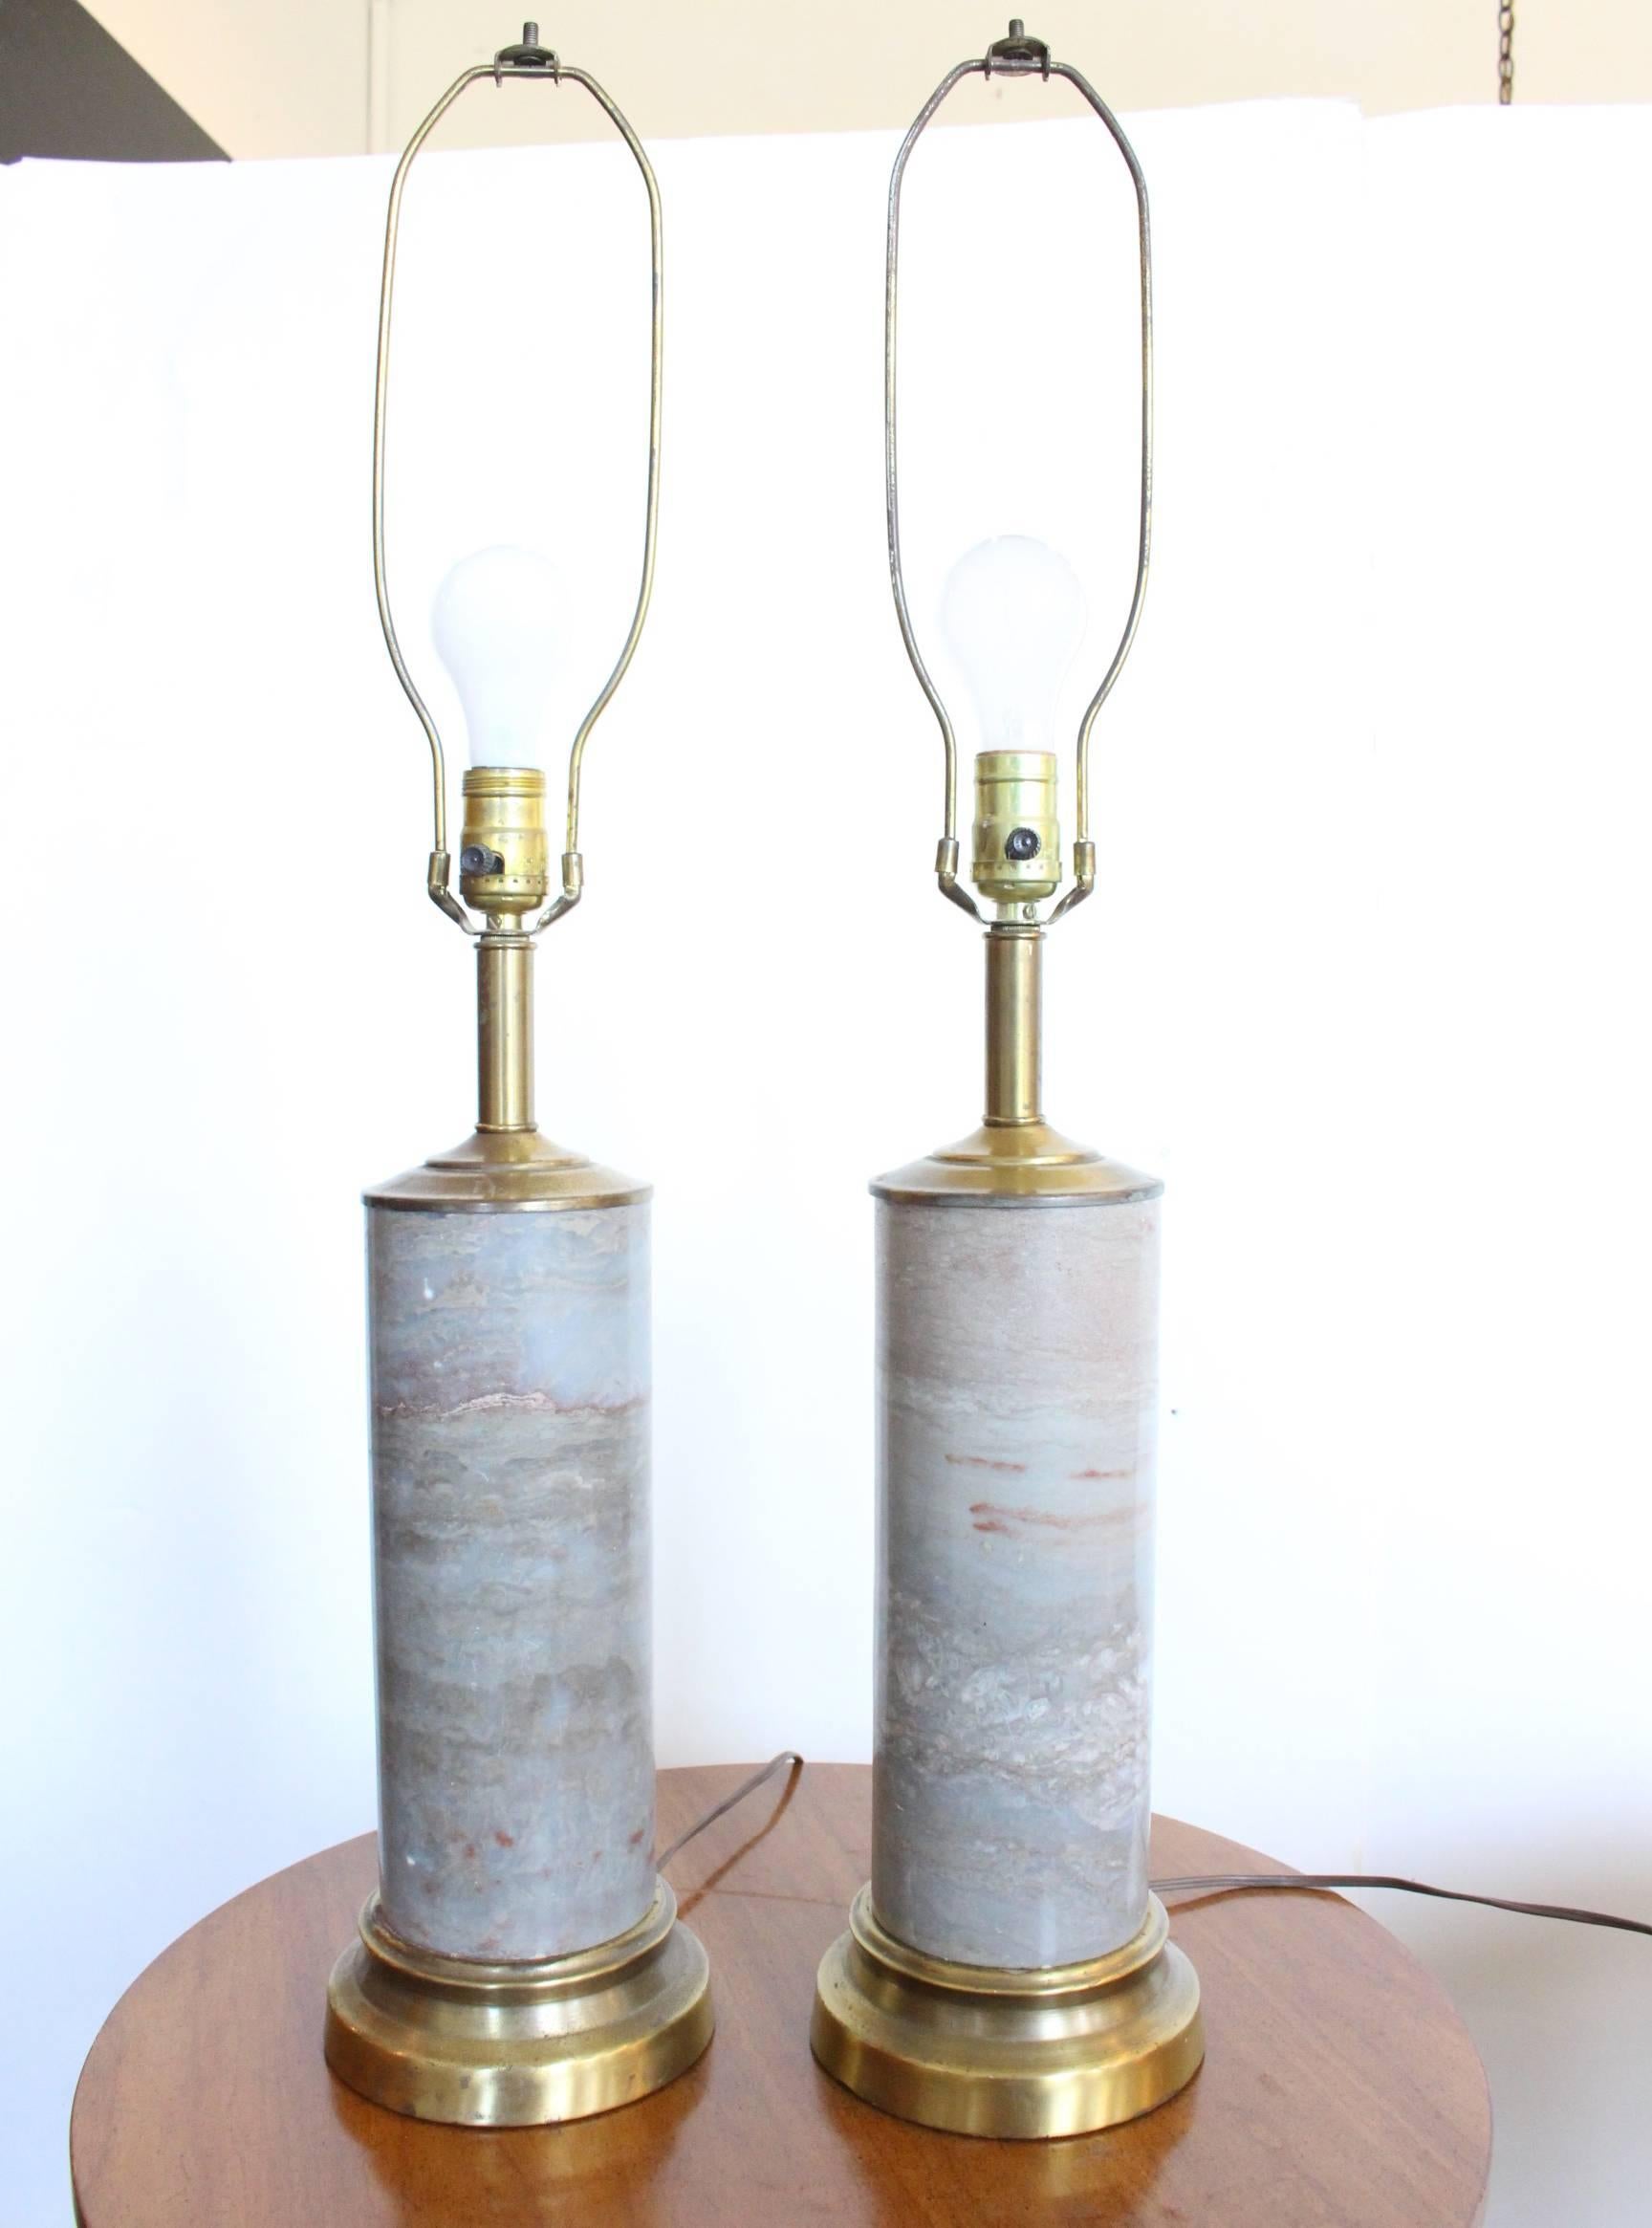 Pair of marble lamps with brass accents.

Dimensions: 6" diameter x 20" (to socket).